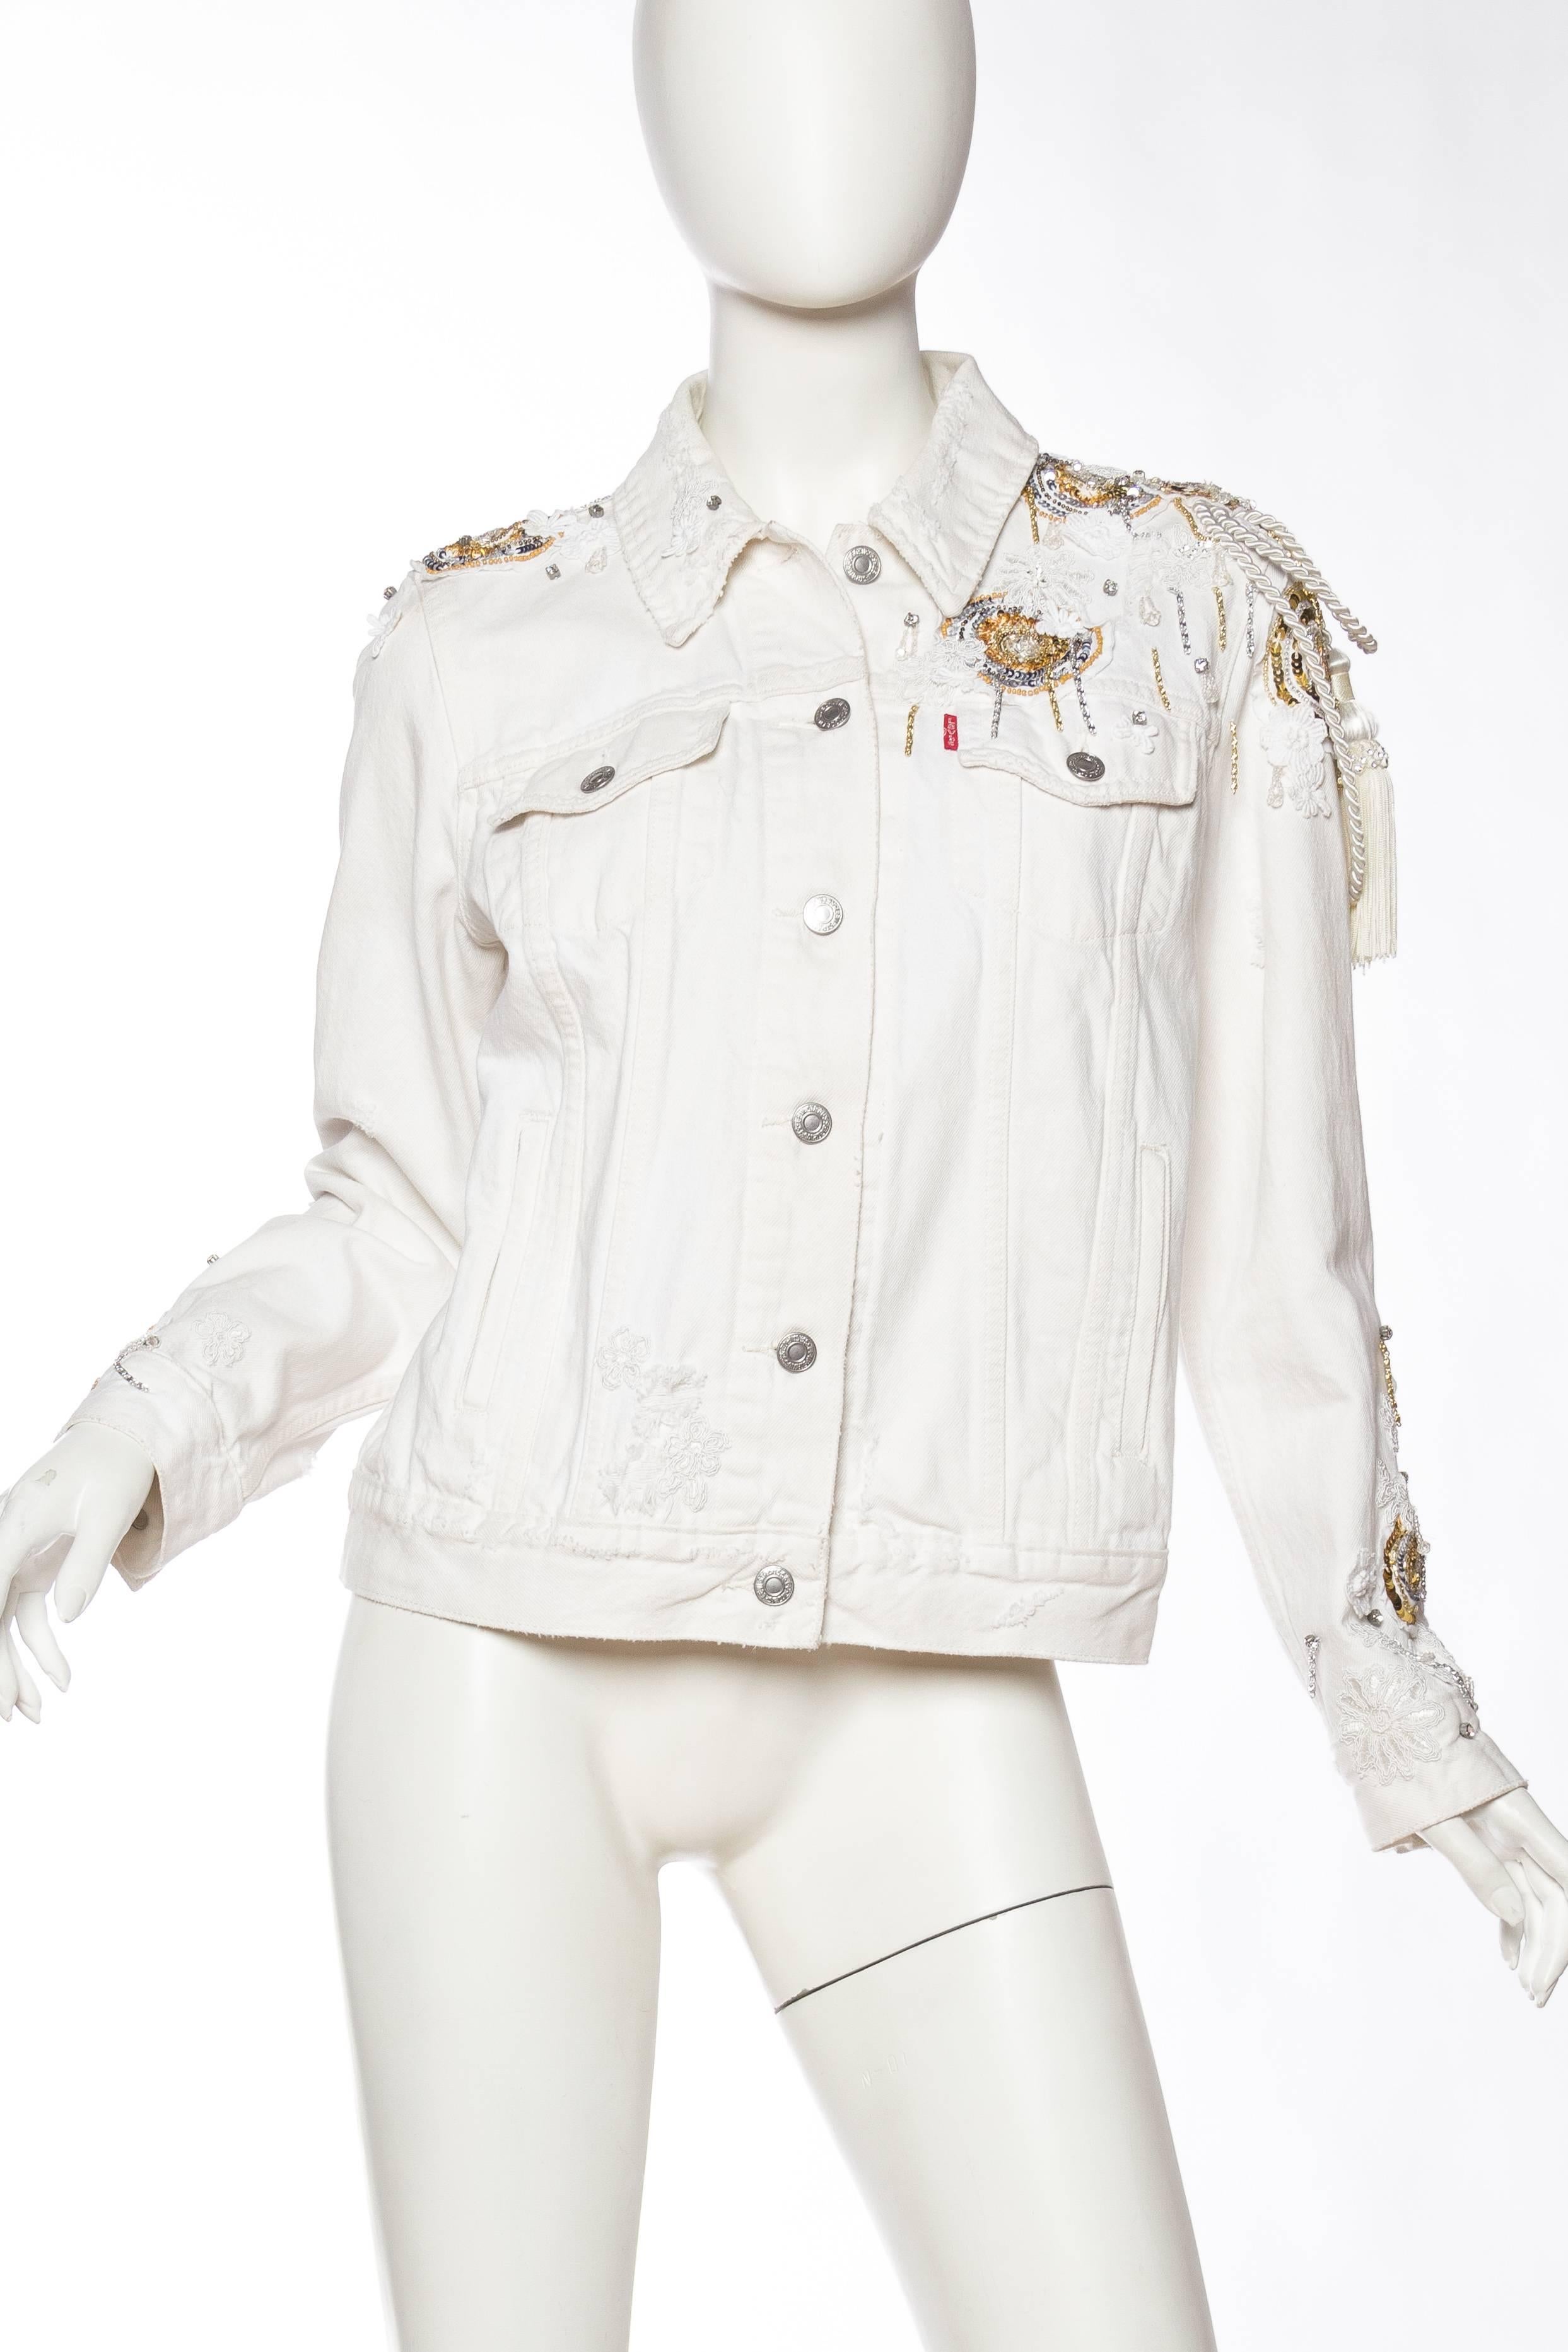 50% of this sale goes towards the Unleashed World  MORPHEW COLLECTION X UNLEASHED White Cotton Denim Gold Sequin, Lace & Crystal Embellished Jean Jacket 
MORPHEW COLLECTION is made entirely by hand in our NYC Ateliér of rare antique materials